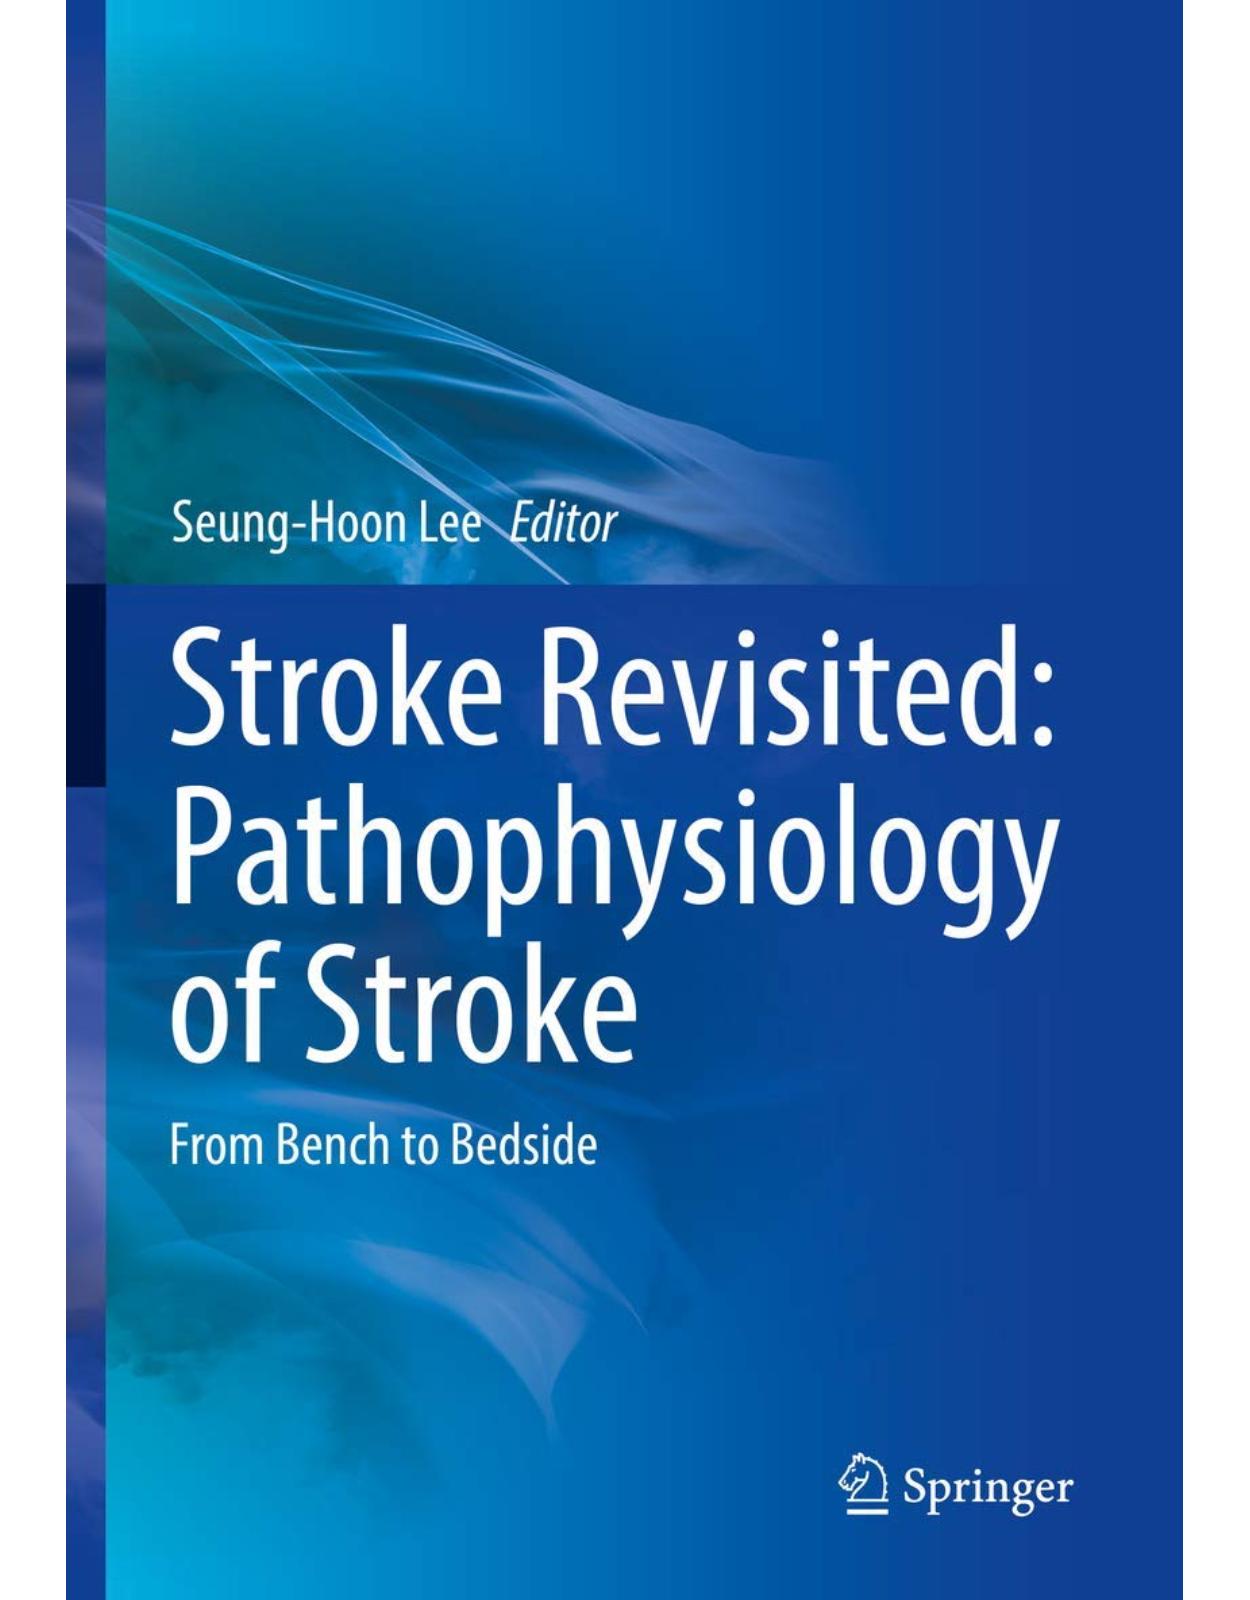 Stroke Revisited: Pathophysiology of Stroke: From Bench to Bedside